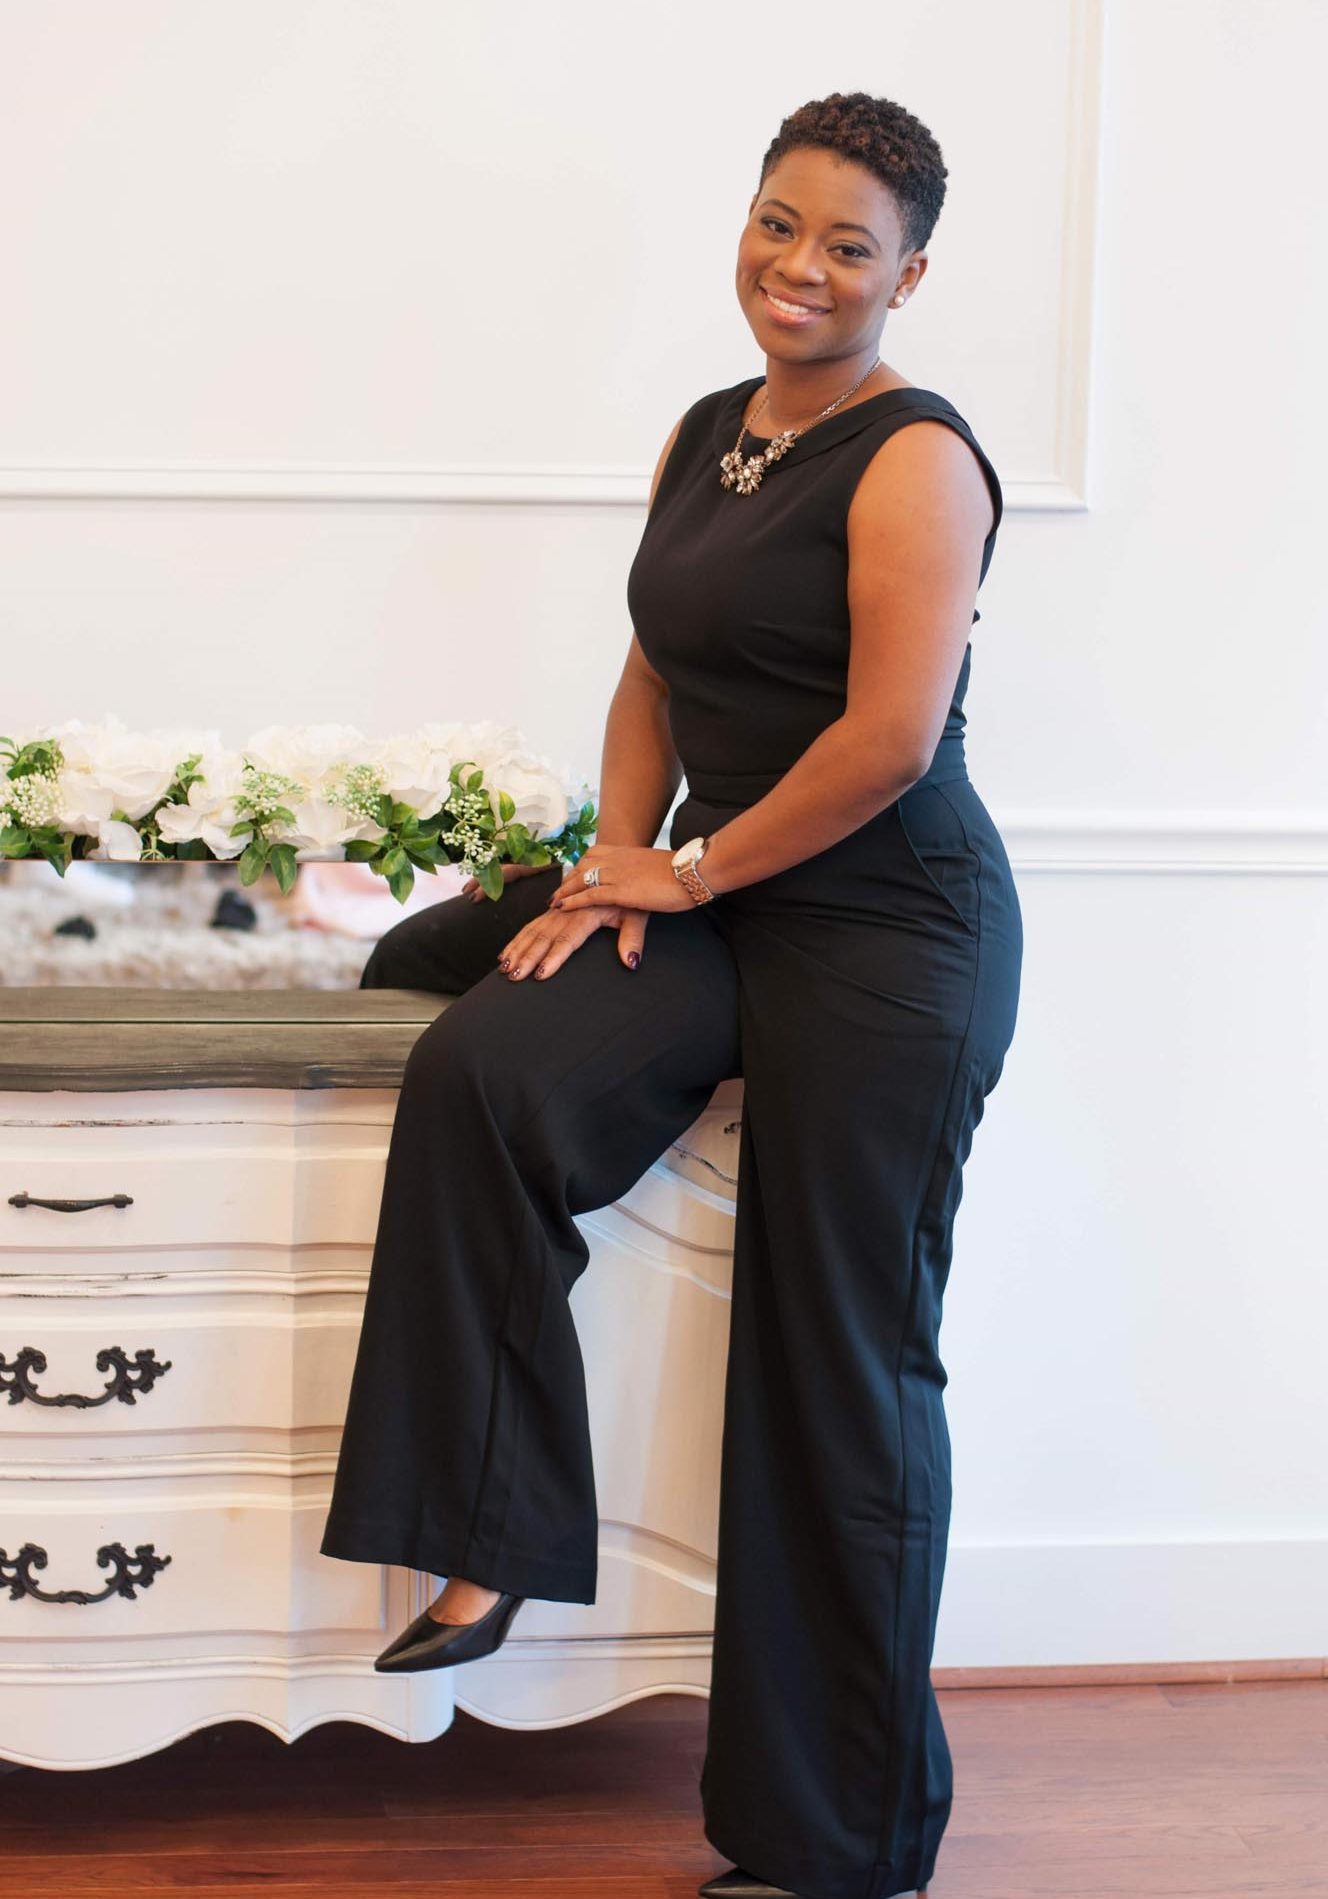 SIMONE CHARLES, OWNER OF <a href="https://www.confettiroomcincy.com/" target="_blank" rel="noopener">THE CONFETTI ROOM</a>